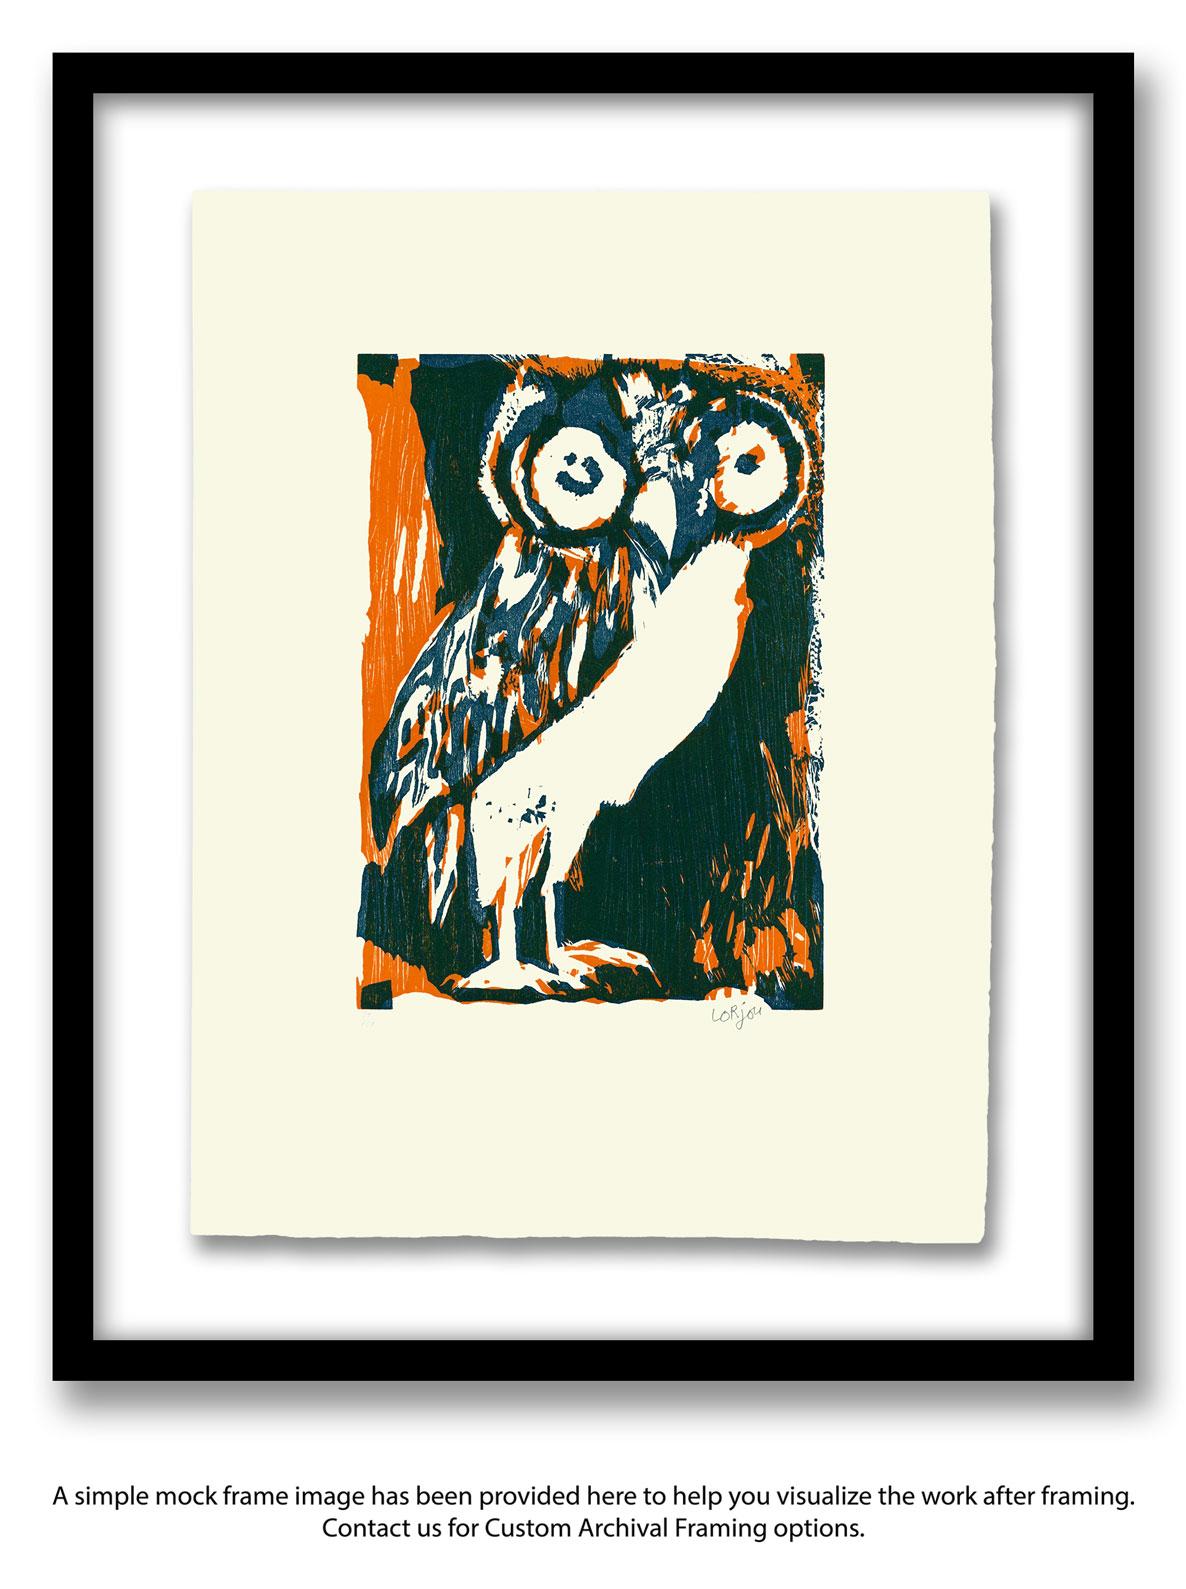 “Le Hibou” (The Owl), a Limited Edition and Hand-Signed Woodblock by Bernard Lorjou, is an exquisite example of his masterful work. This whimsical, abstract, realist, expressionist portrait of an owl would make a great addition to any art collection